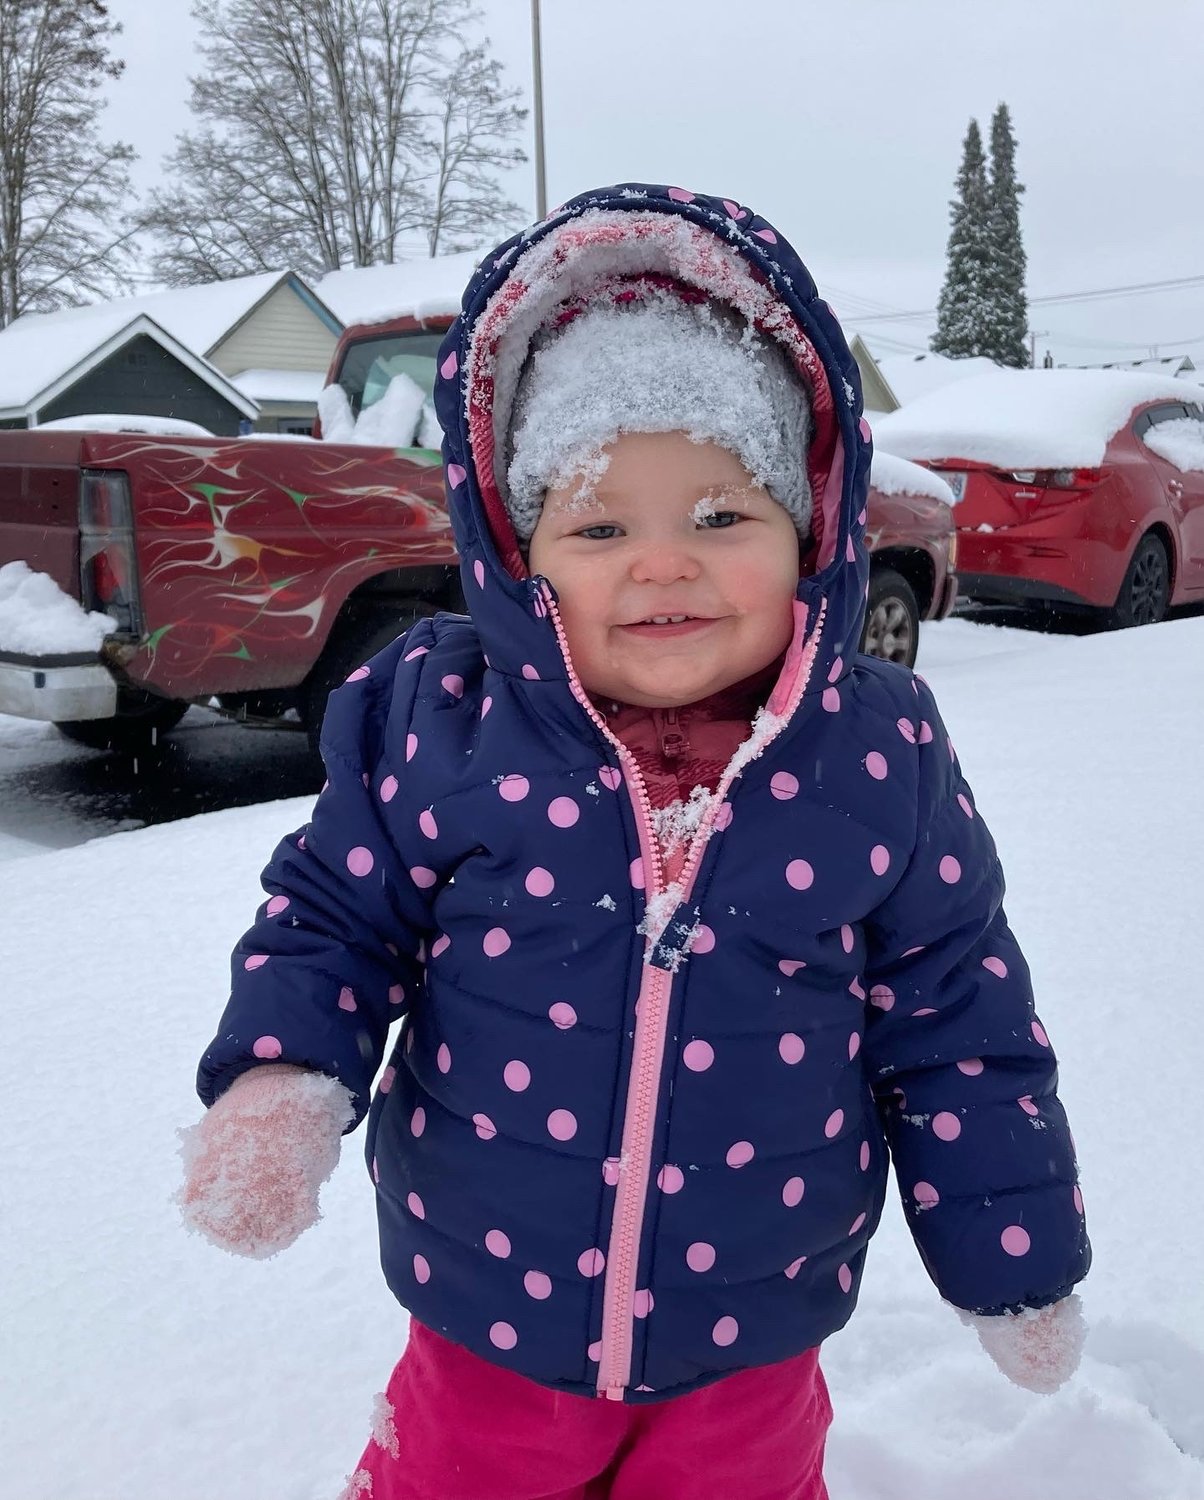 “Lorelai’s first big girl snow!” wrote Andrea Scott, who submitted this photo.